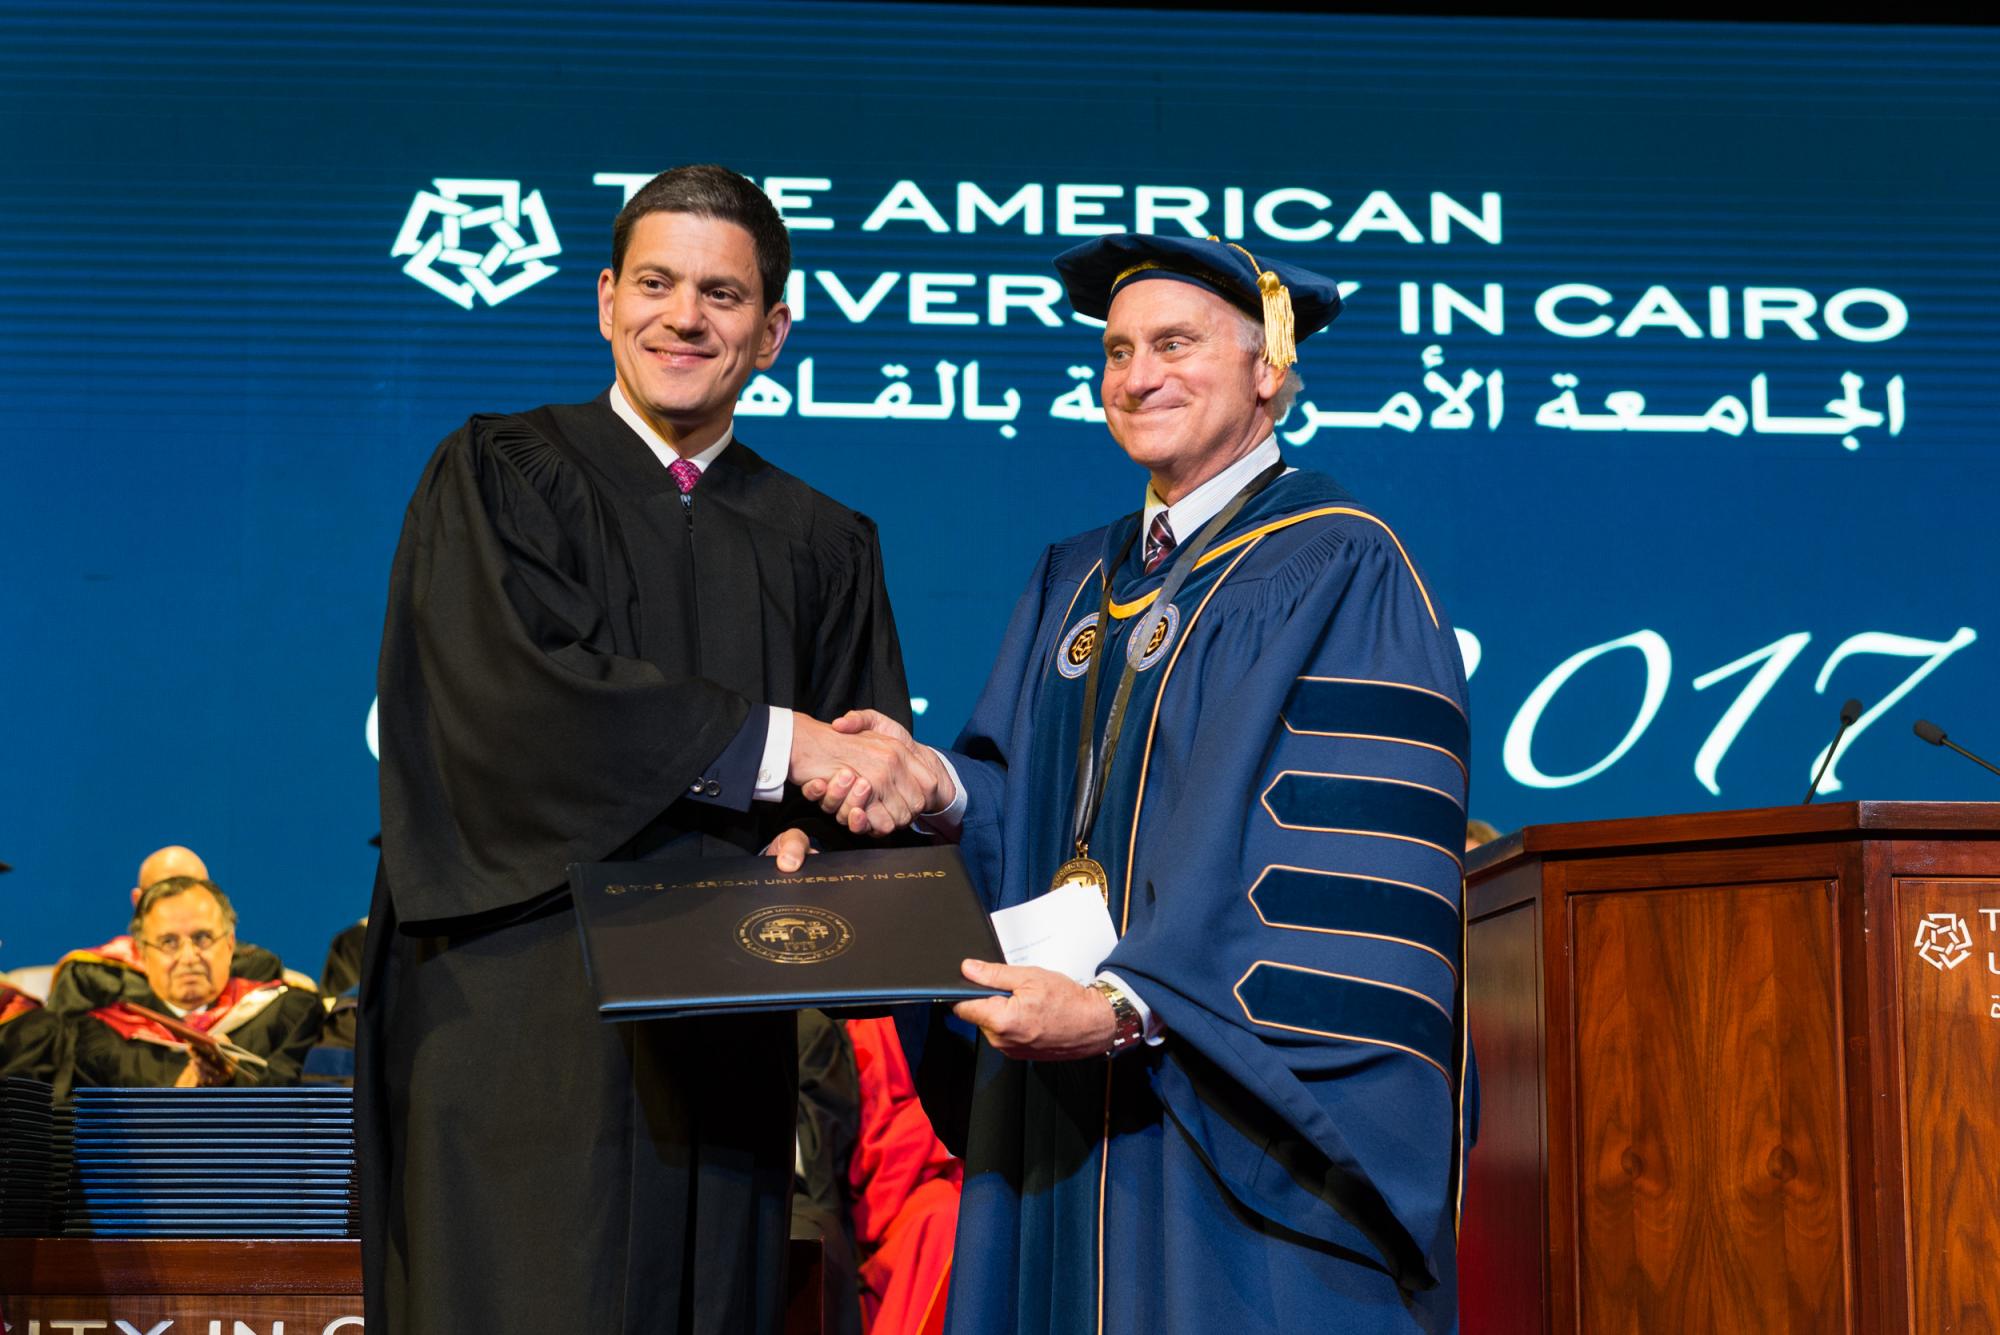 President Ricciardone presented David Miliband, president and CEO of the International Rescue Committee, with an honorary Doctor of Humane Letters (honoris causa) at the 2017 graduate commencement ceremony. 